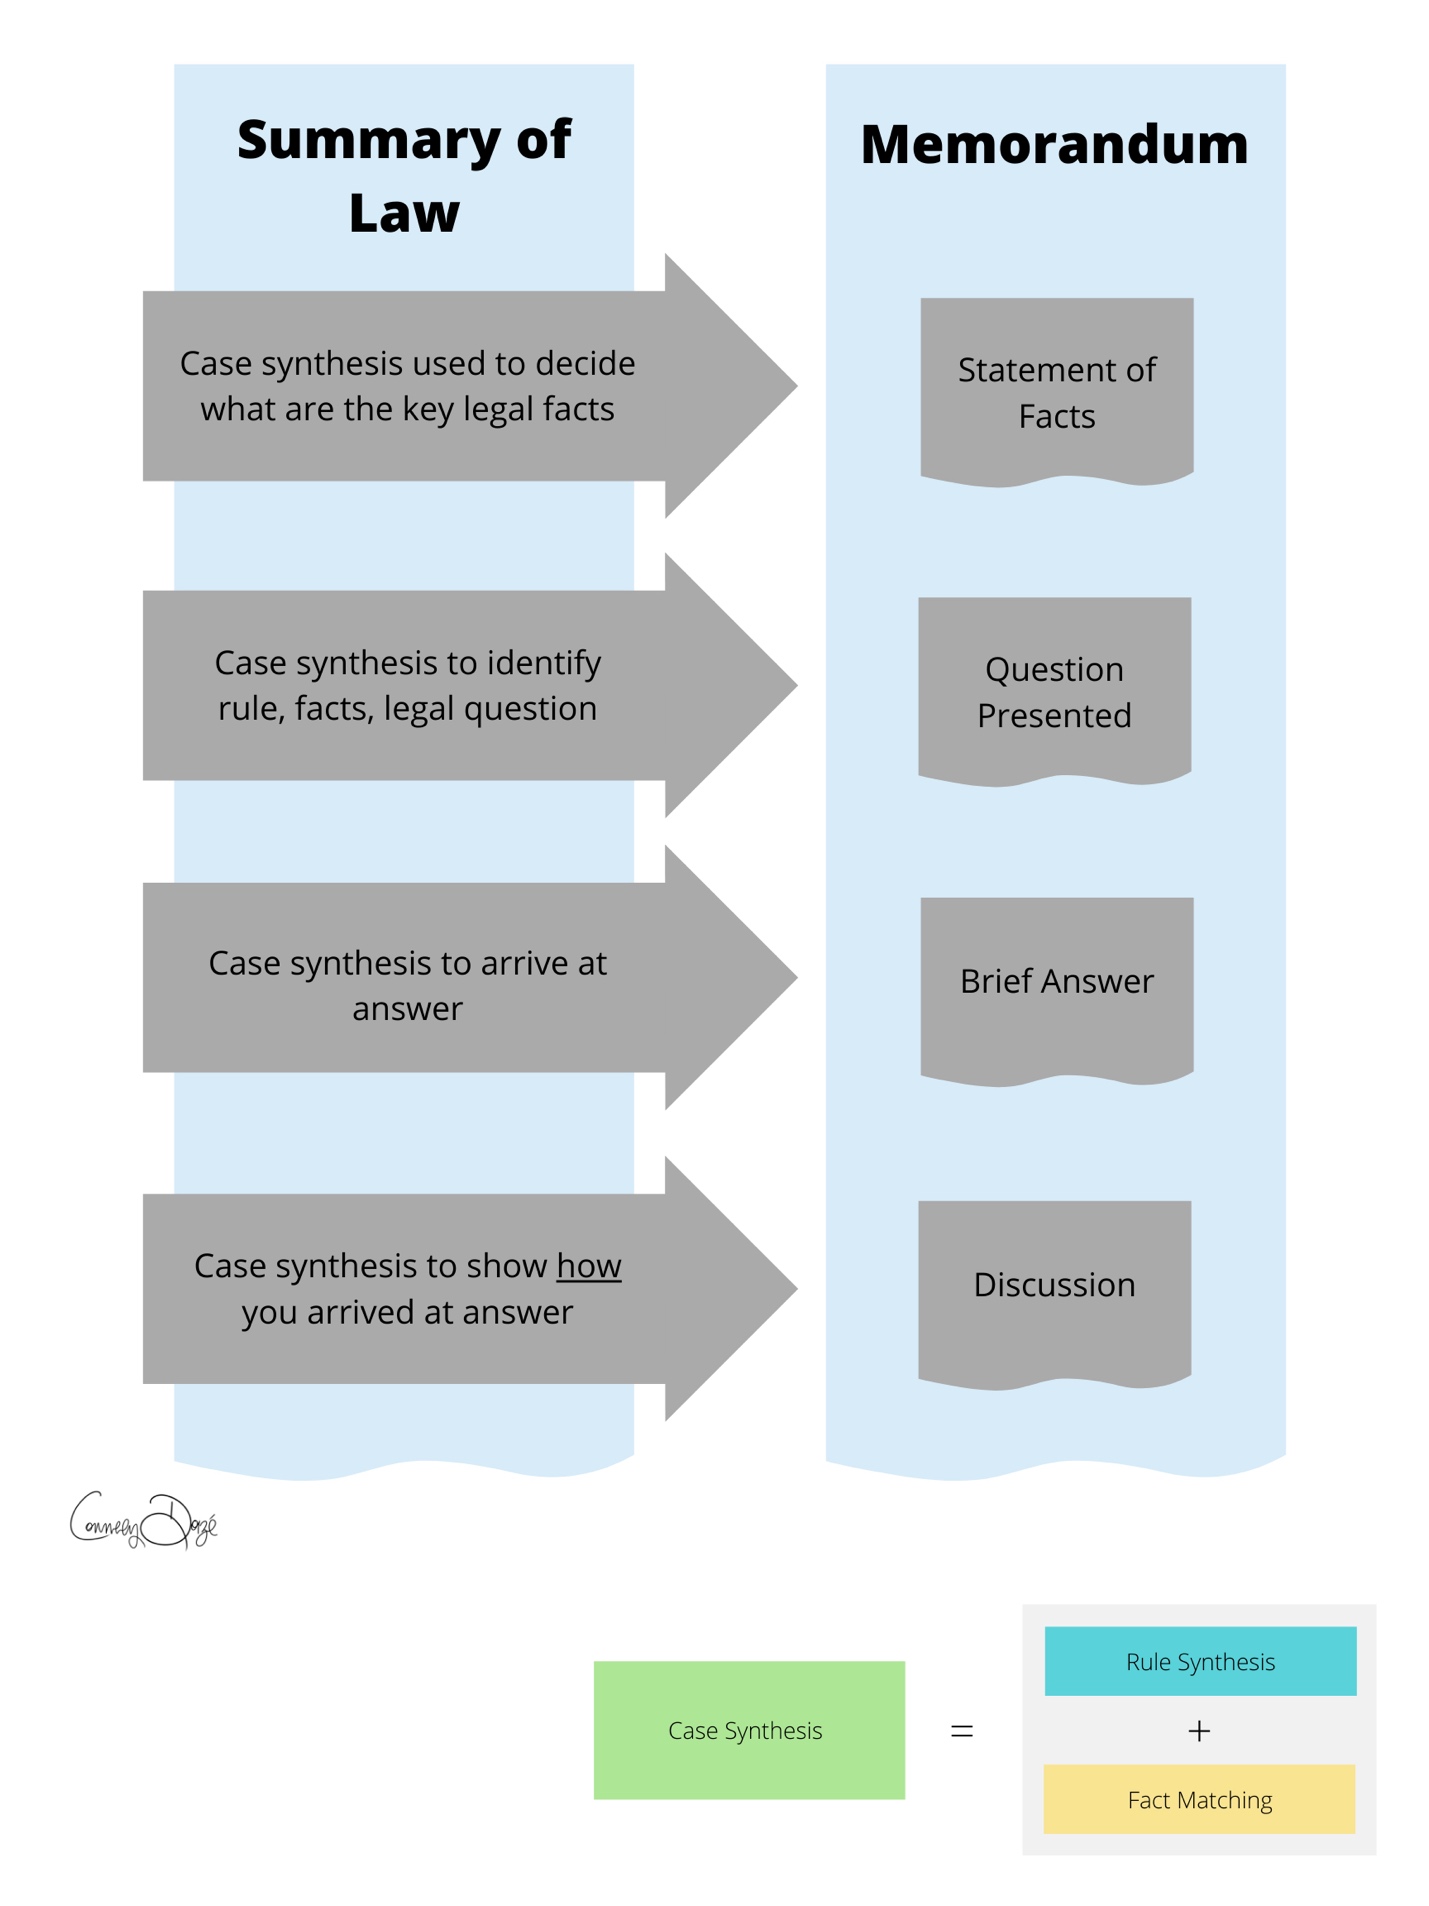 Graphic showing how case synthesis is used to take Summary of Law and make it a Memo